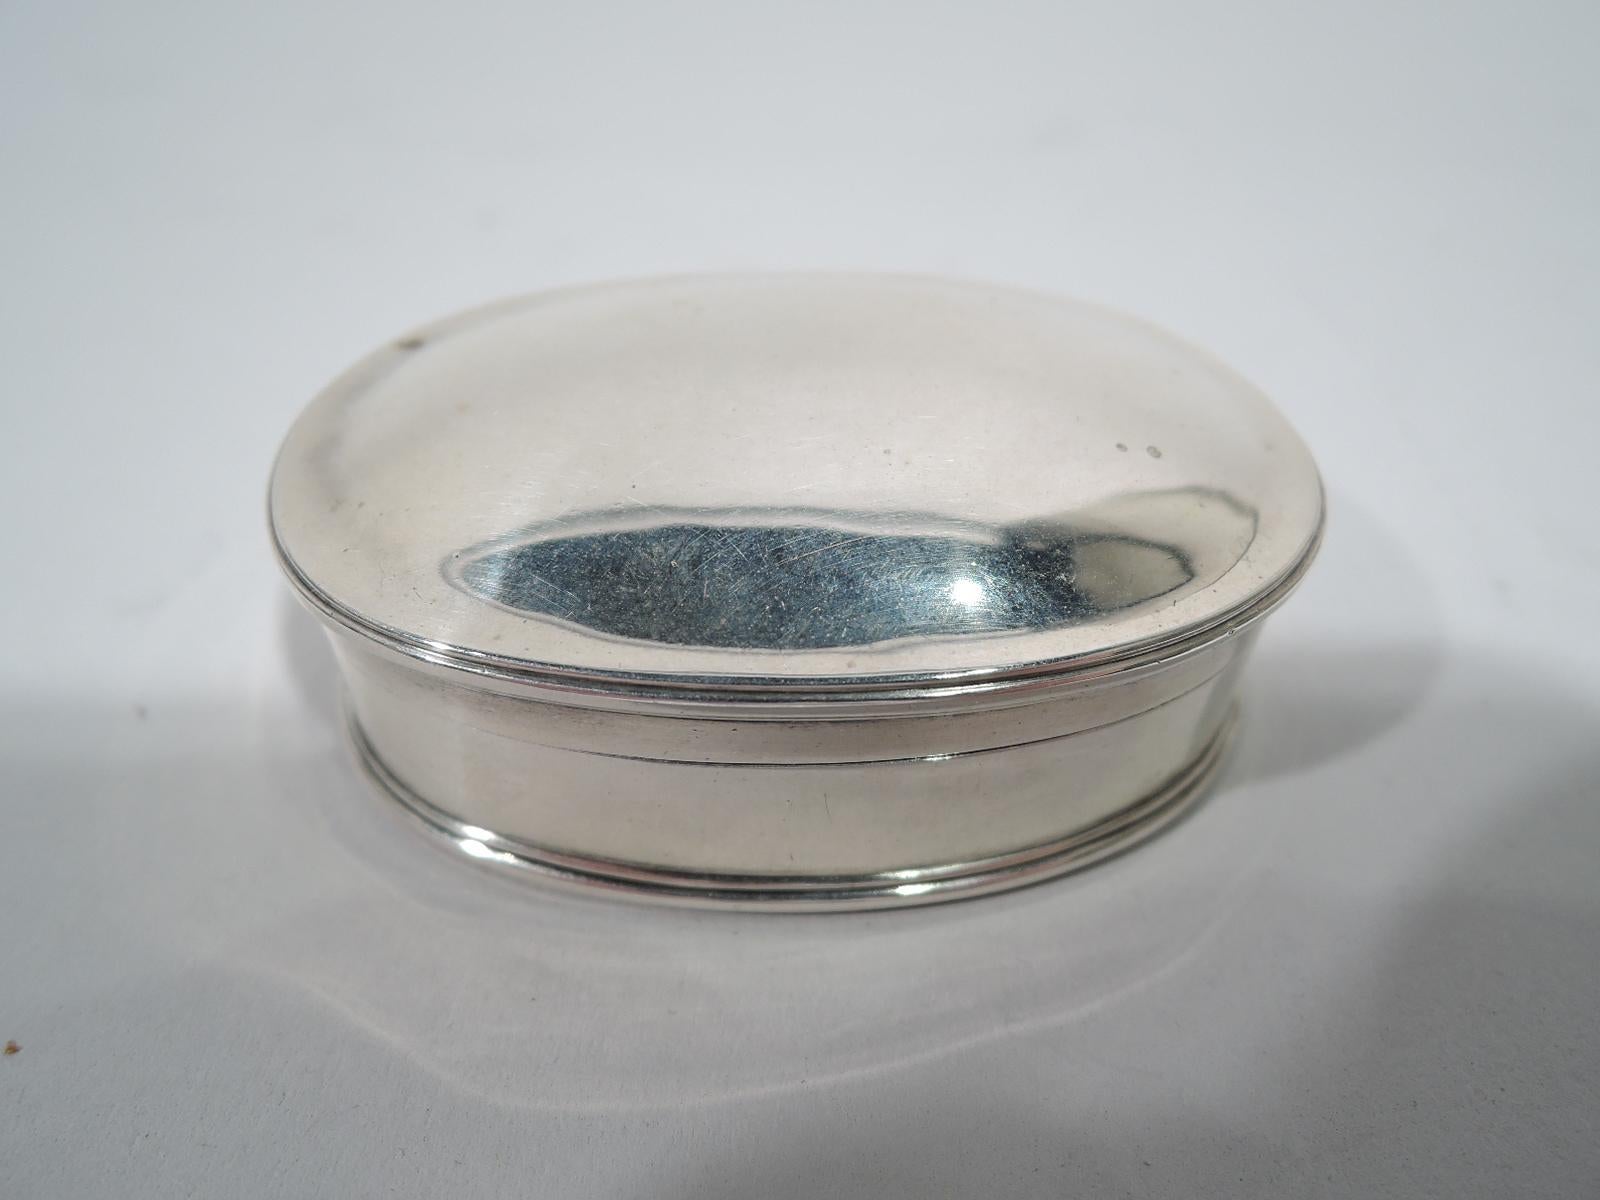 Craftsman sterling silver trinket box. Made by Arthur Stone in Gardner, Massachusetts, ca 1920. Oval with straight sides and molded base. Cover gently curved with molded rim. Gilt interior. Fully marked including silversmith’s initial T for Herbert